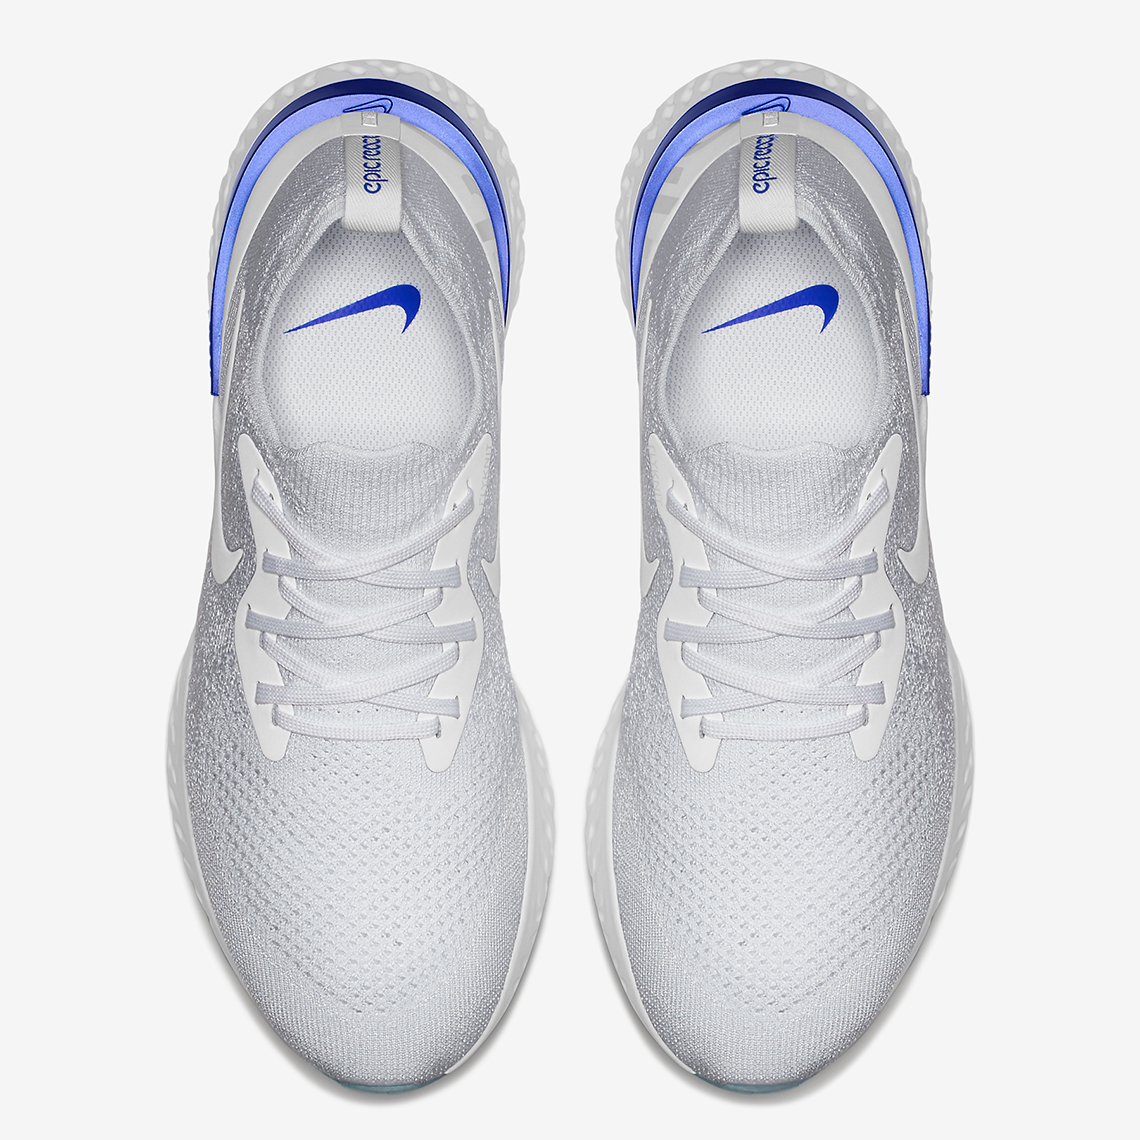 Nike Epic React AQ0067-100 Blue/White Nike+ App Official Images ...